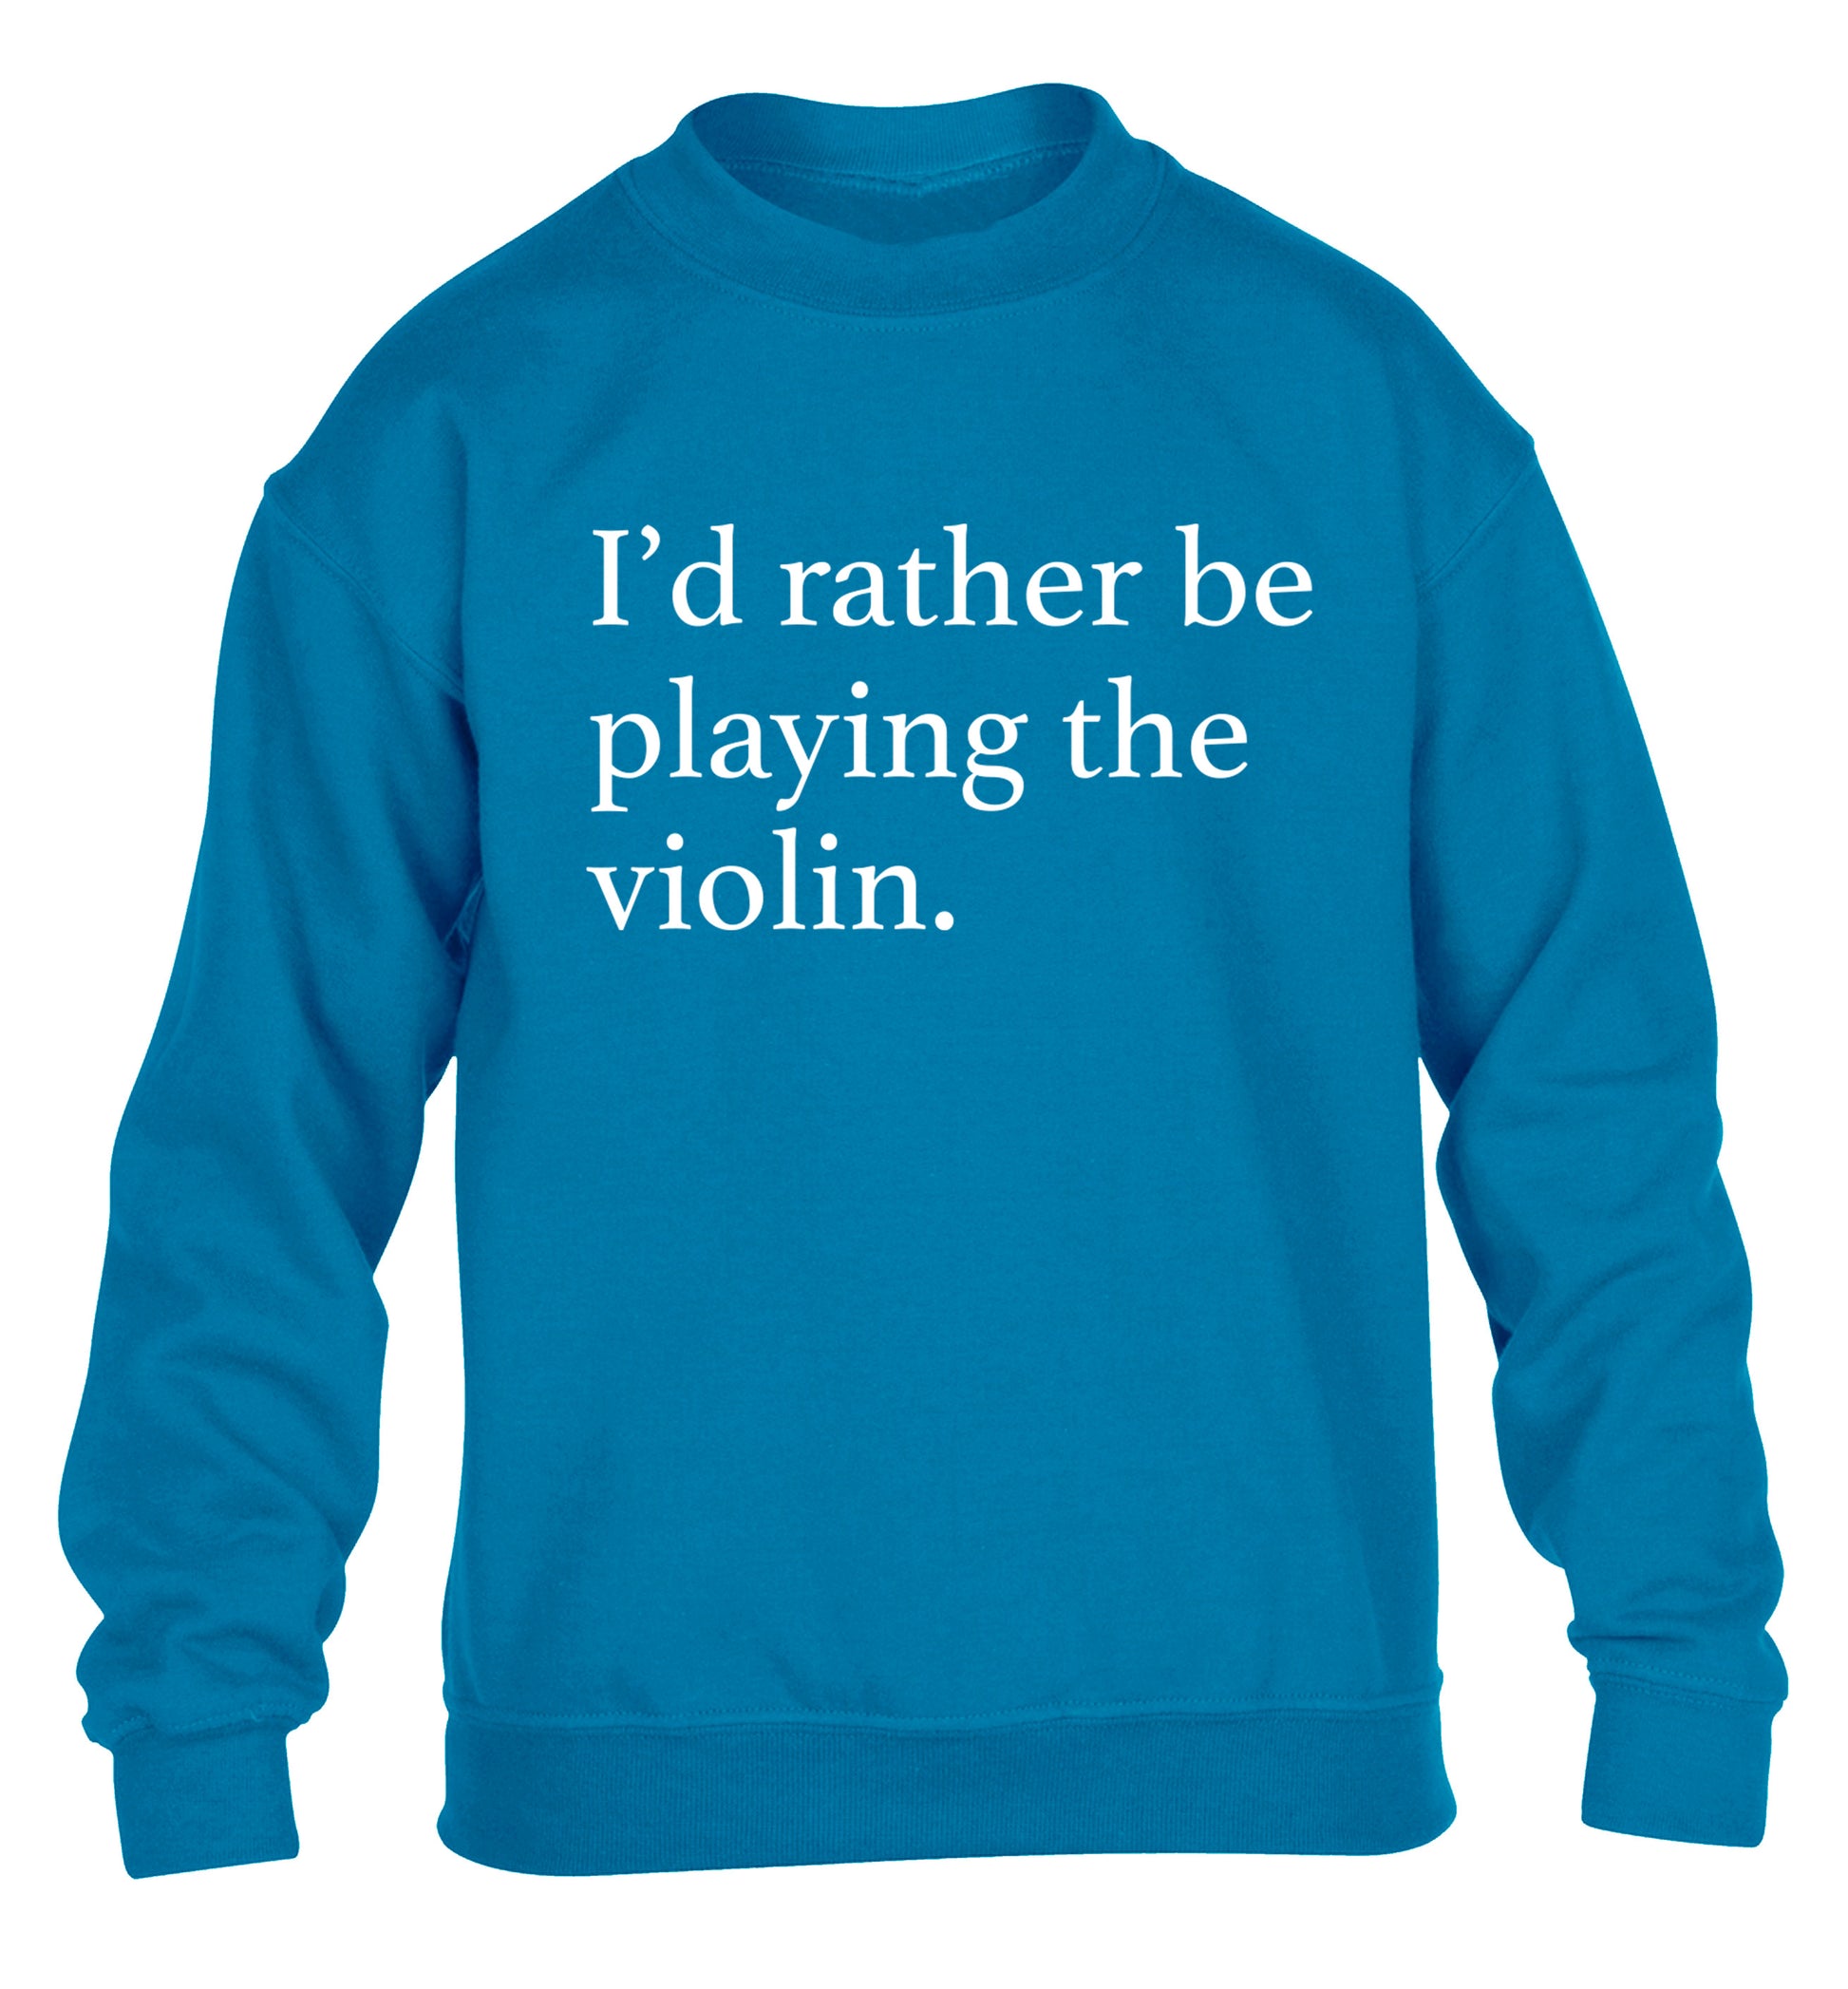 I'd rather be playing the violin children's blue sweater 12-13 Years